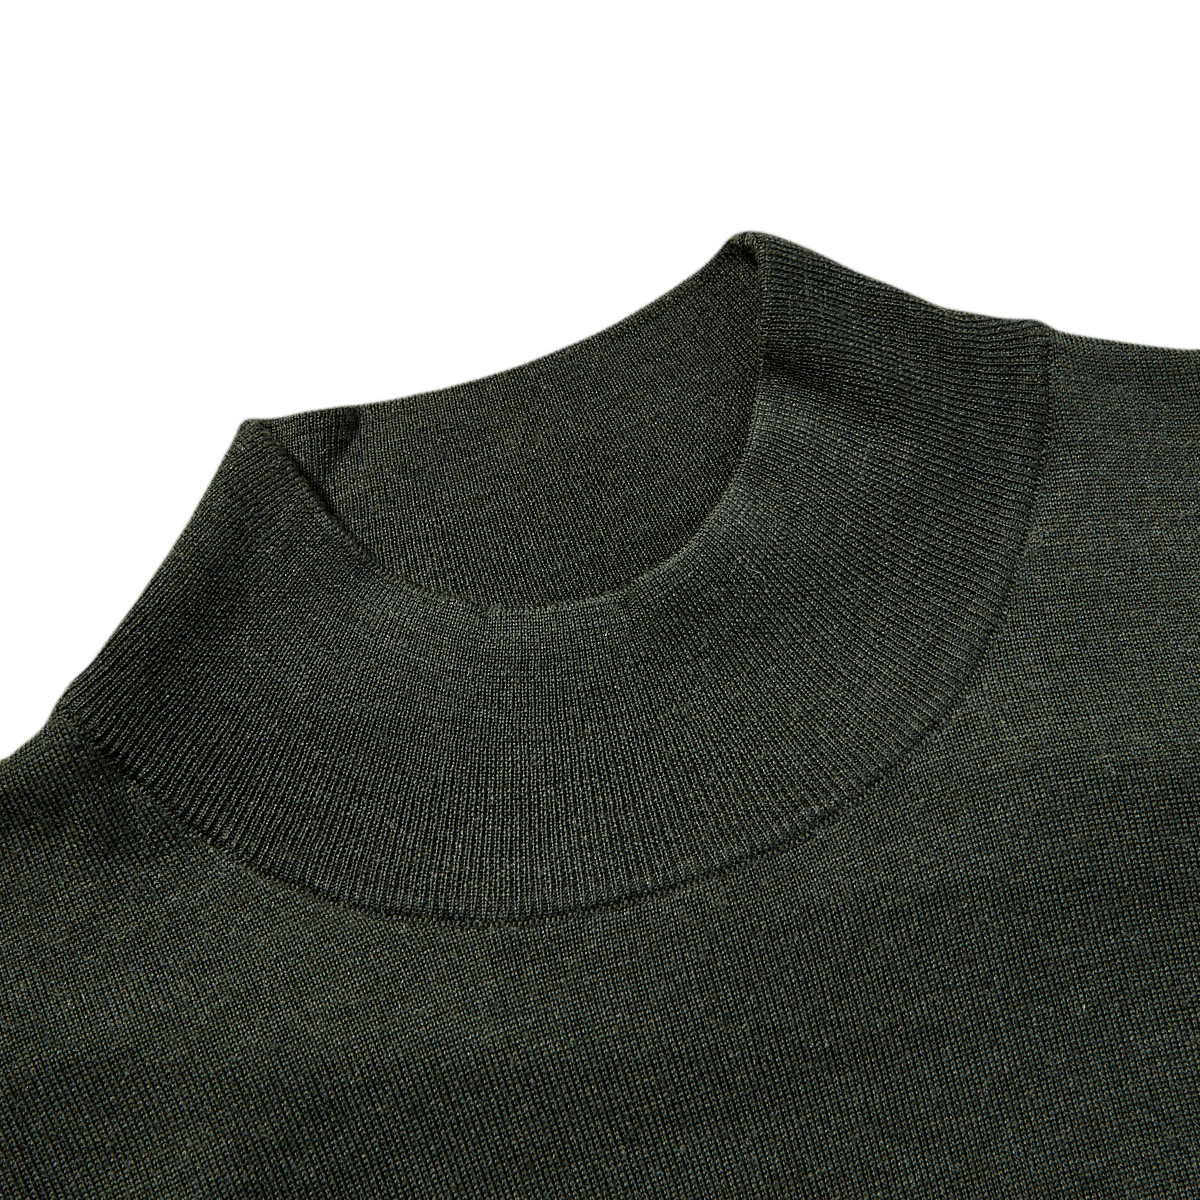 A close up of a Fedeli Green 140s Wool Mockneck Sweater.